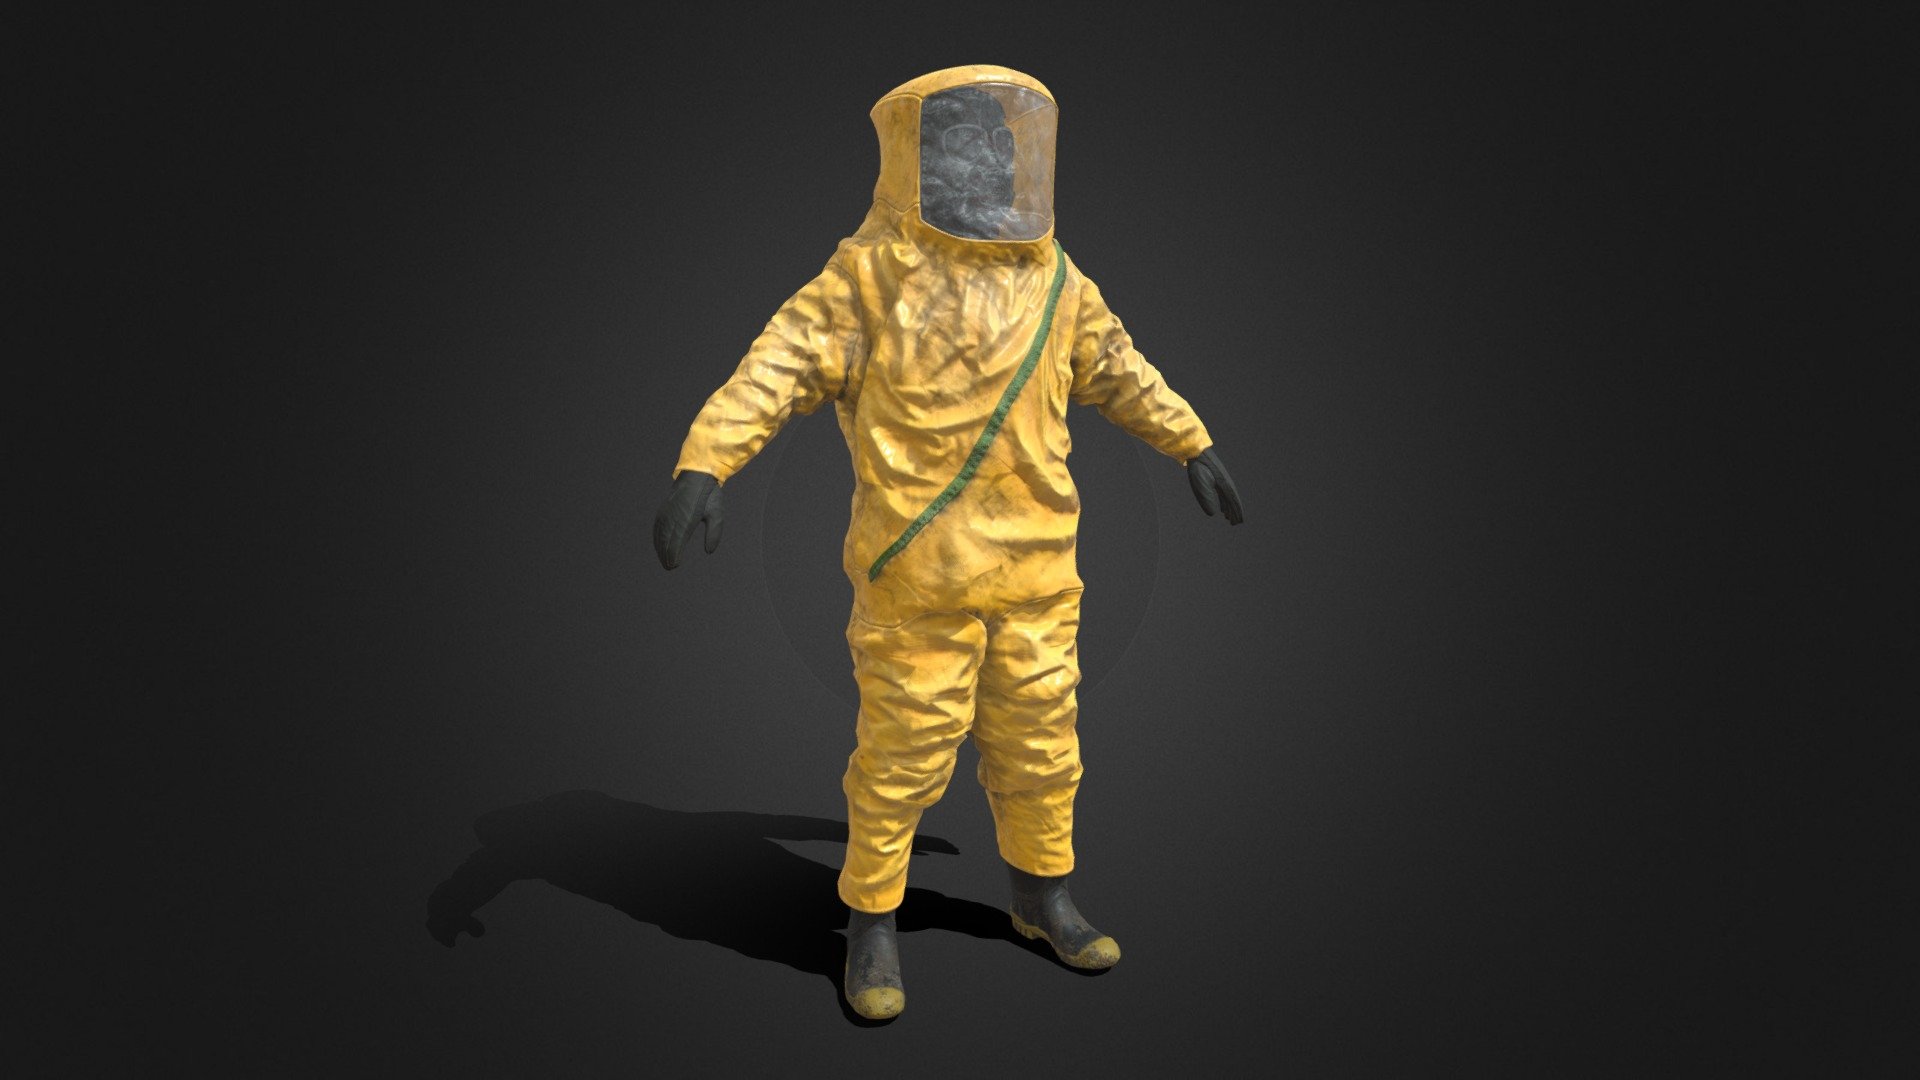 Not RIGGED version

Gas Mask Included 3D Hazmat nuclear , bacteriological , chemical hazard NBC ( Level 3 and 4 ) Kane Pixels backroom suit modeled in high precision with two Color Sets of Textures. This is a mix between several references i found. this model has been accurately recreated in 3d High poly to keep every details.

The entire model was textured with its accessories relying on references and actual products. Textures may need to be relocate after uncompressing the Texture file.

included :
High poly Model
4K Textures. Dark Green &amp; Yellow

Royalty Free License ( Cf Cgtrader Terms and conditions ). Can be used in any type of projects : Image, render, vfx, commercial, Nft, video, film, games. Reselling Any parts, modified parts, baked Geometry or texture, or any sources file is not allowed 3d model